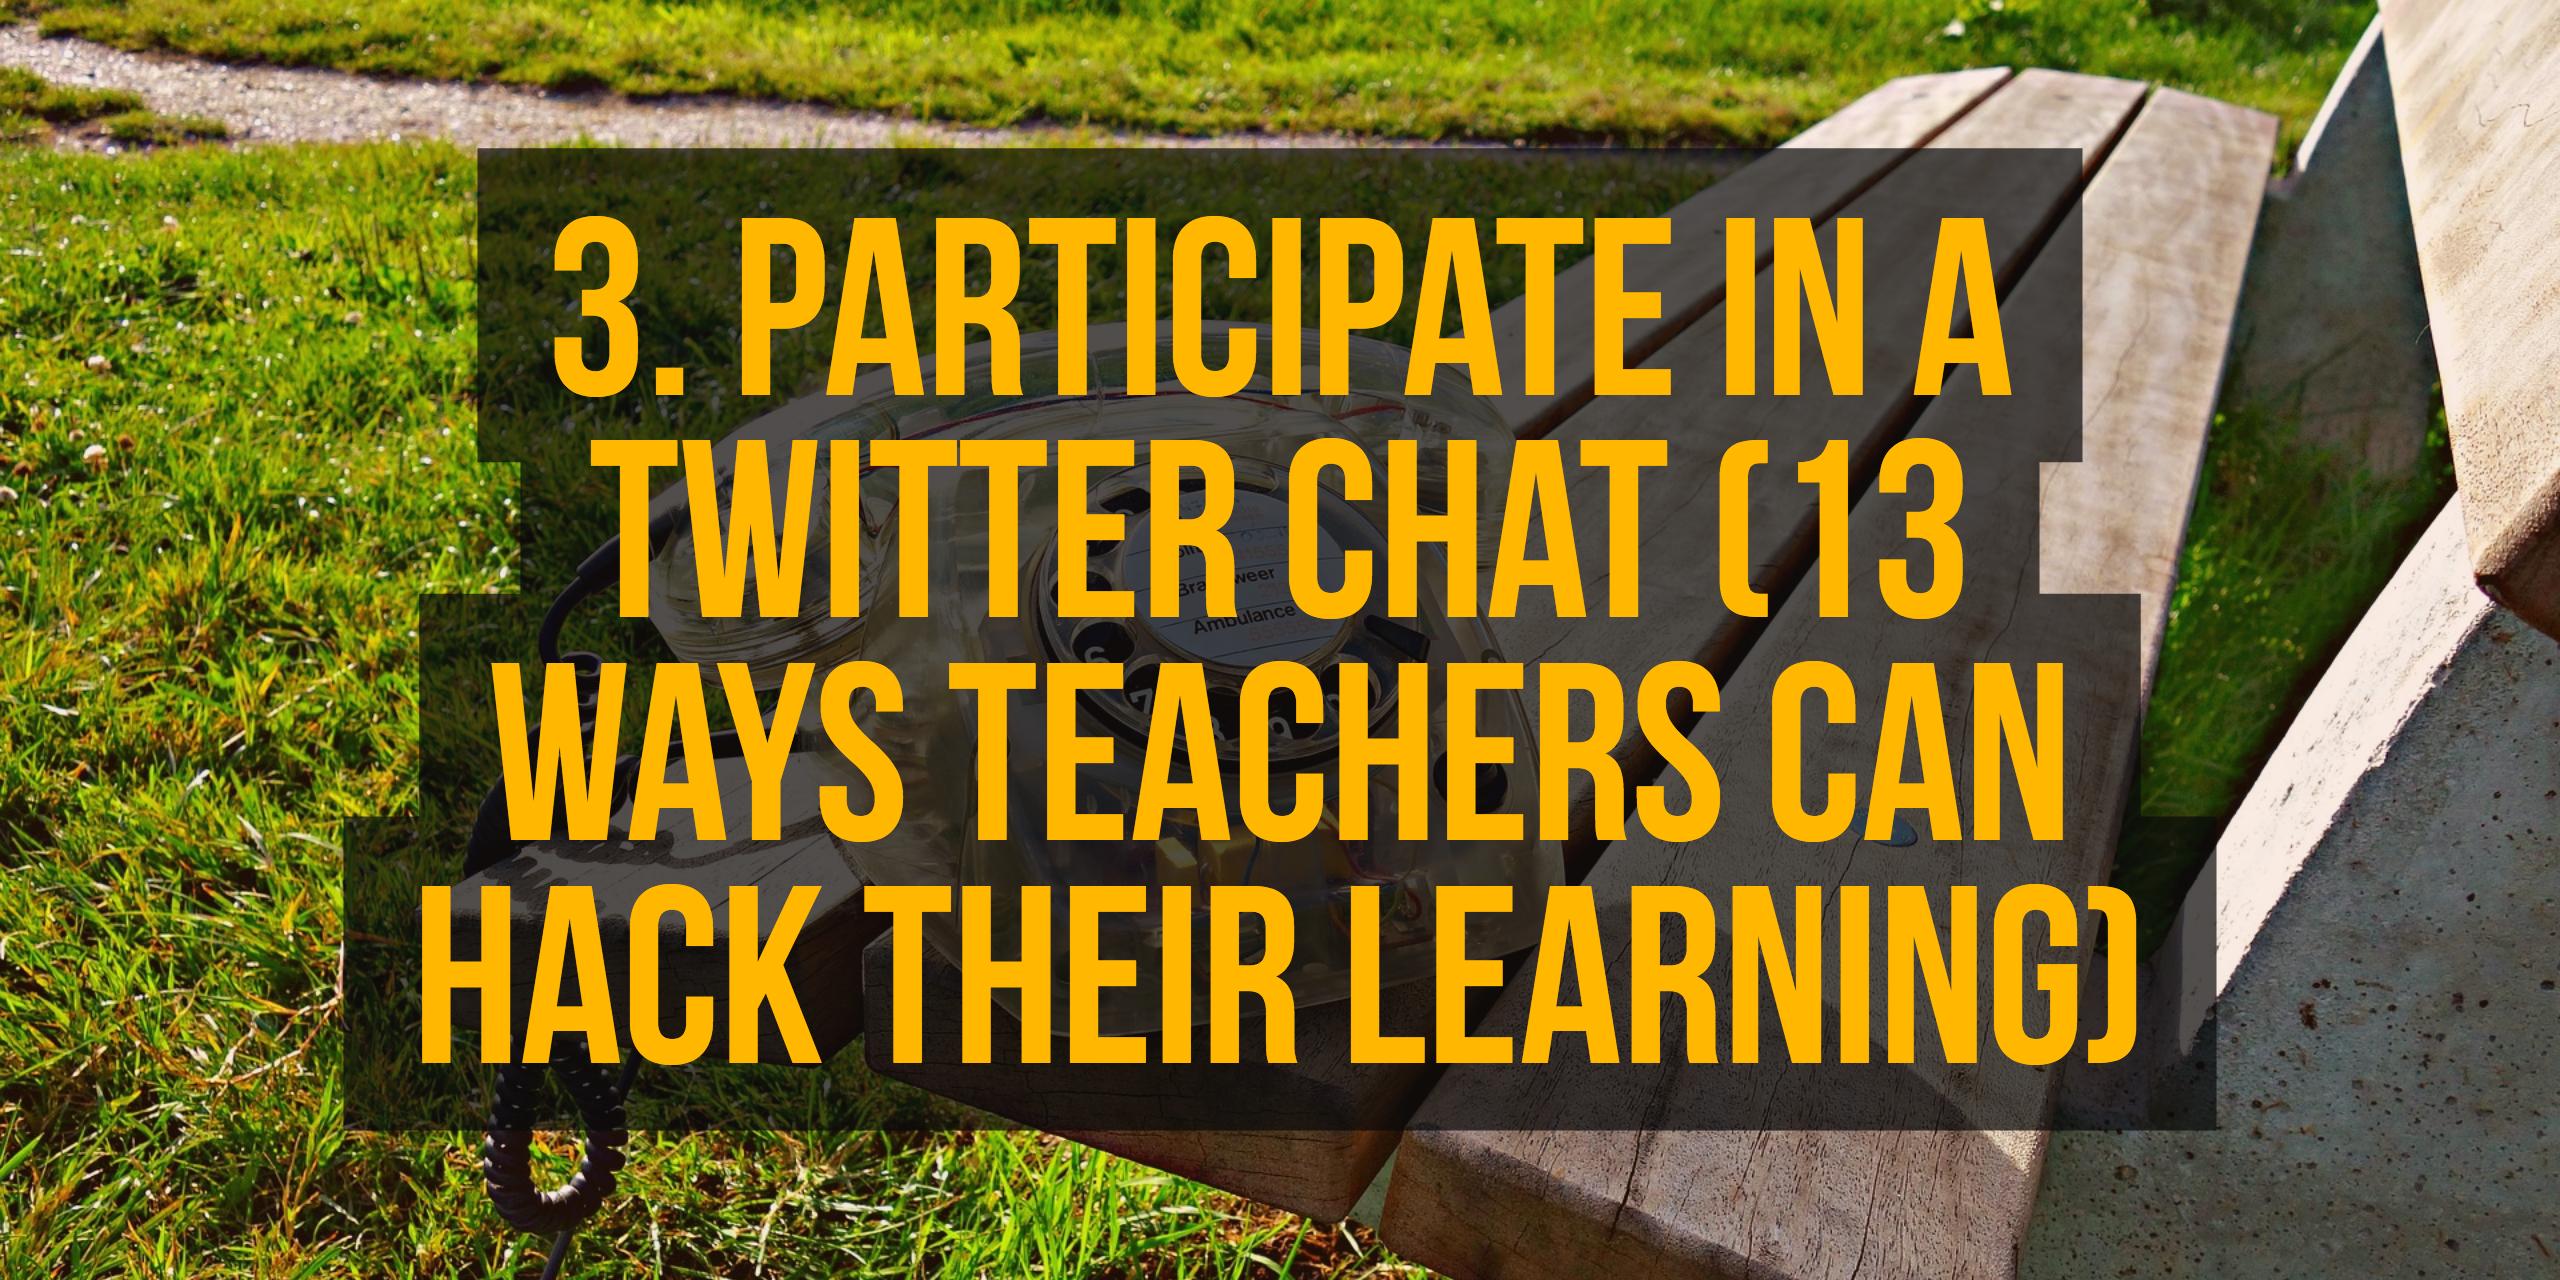 3. Participate in a Twitter chat (13 Ways Teachers Can Hack Their learning)